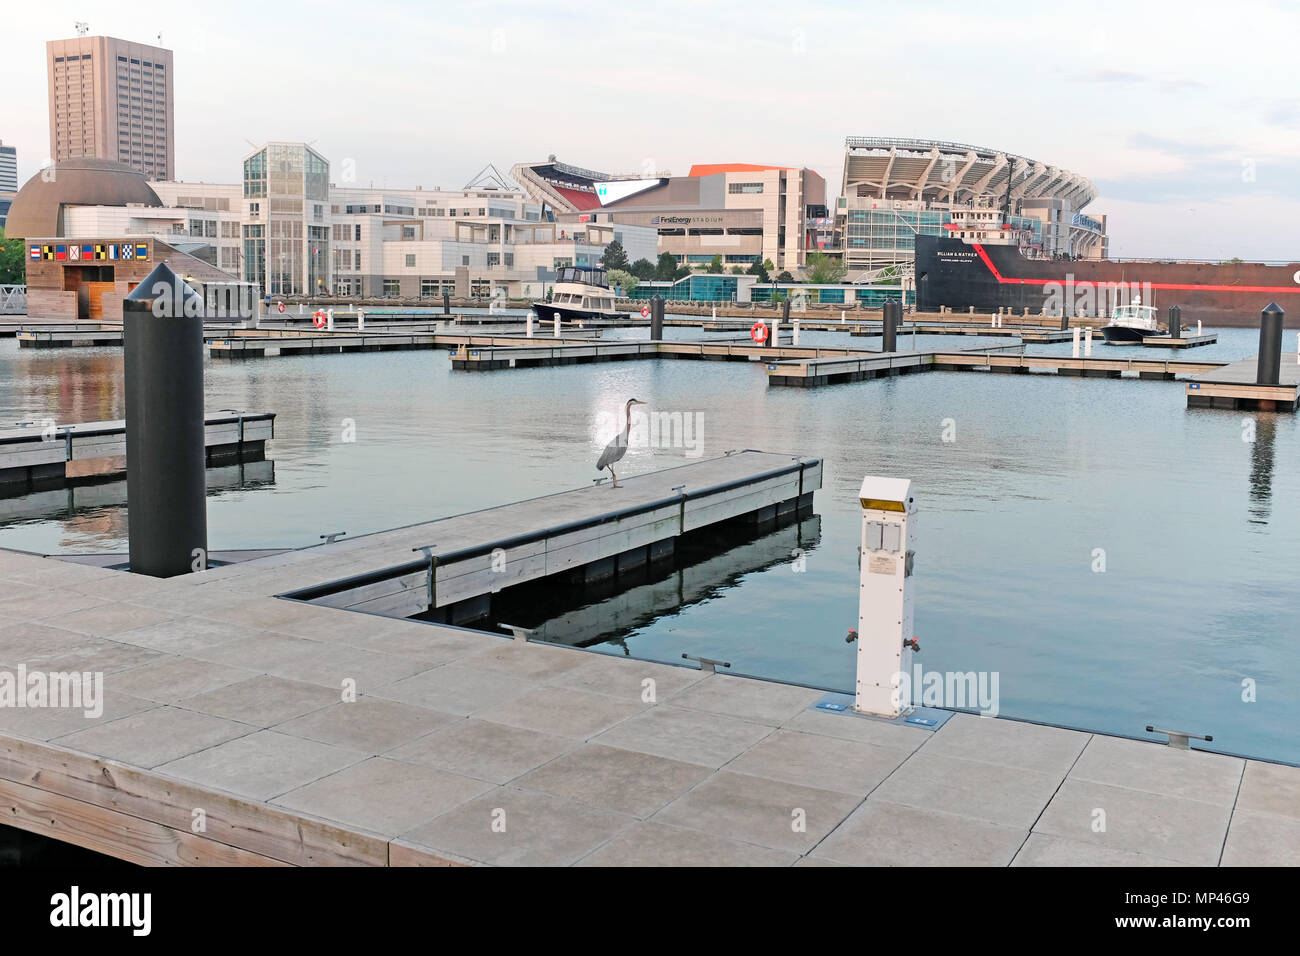 A wild blue heron stands on an empty boat slip in Cleveland harbor with a partial view of the downtown Cleveland skyline in the background. Stock Photo